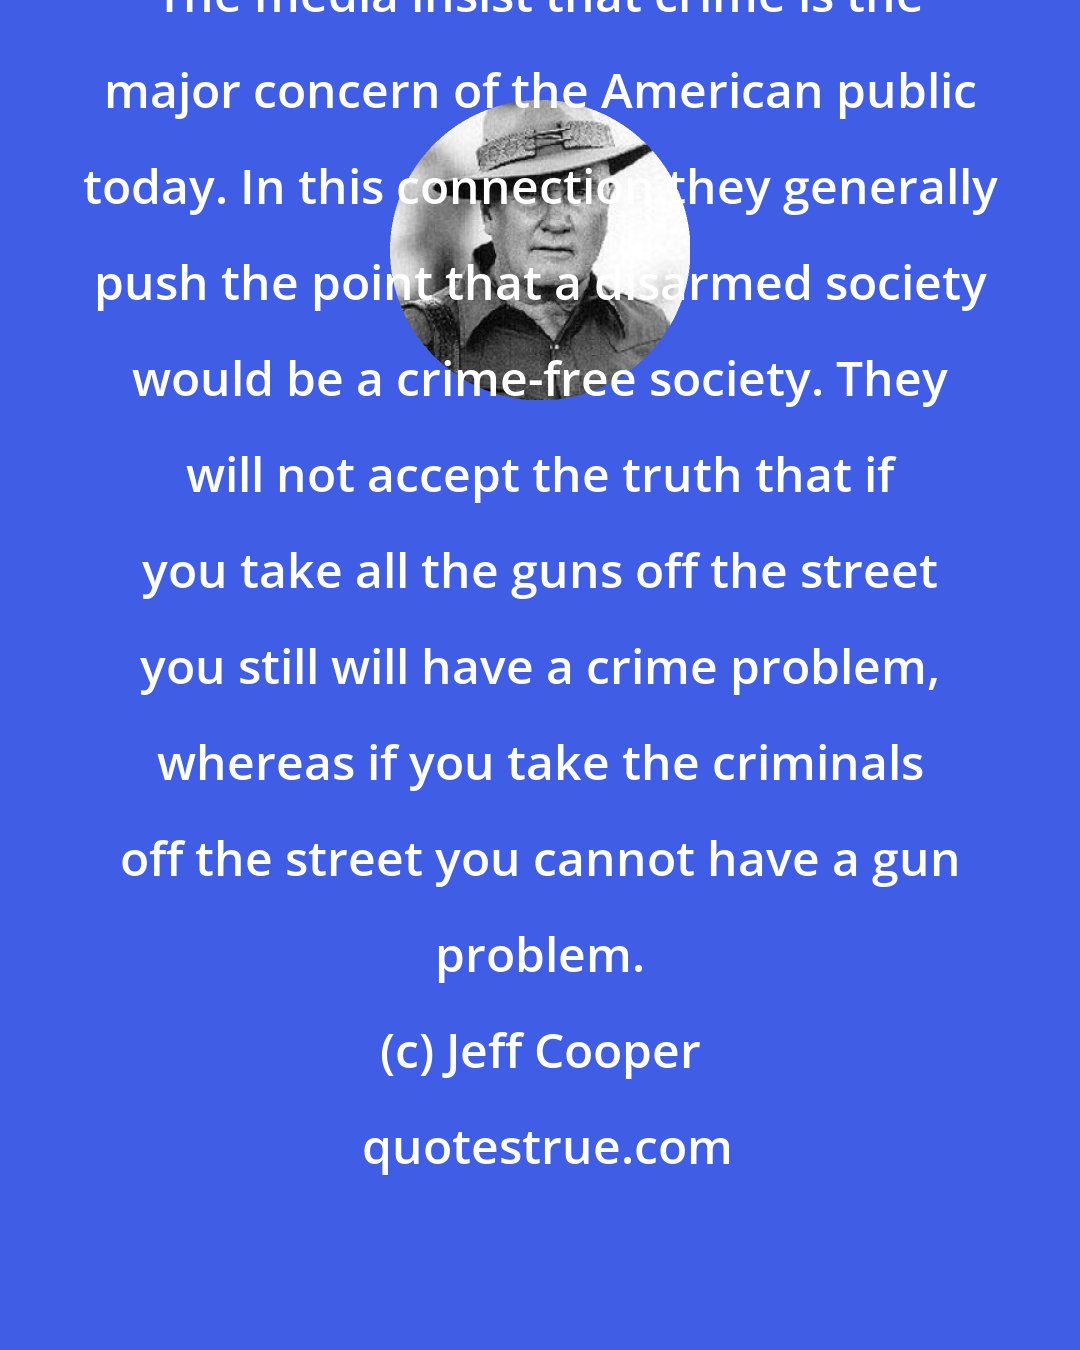 Jeff Cooper: The media insist that crime is the major concern of the American public today. In this connection they generally push the point that a disarmed society would be a crime-free society. They will not accept the truth that if you take all the guns off the street you still will have a crime problem, whereas if you take the criminals off the street you cannot have a gun problem.